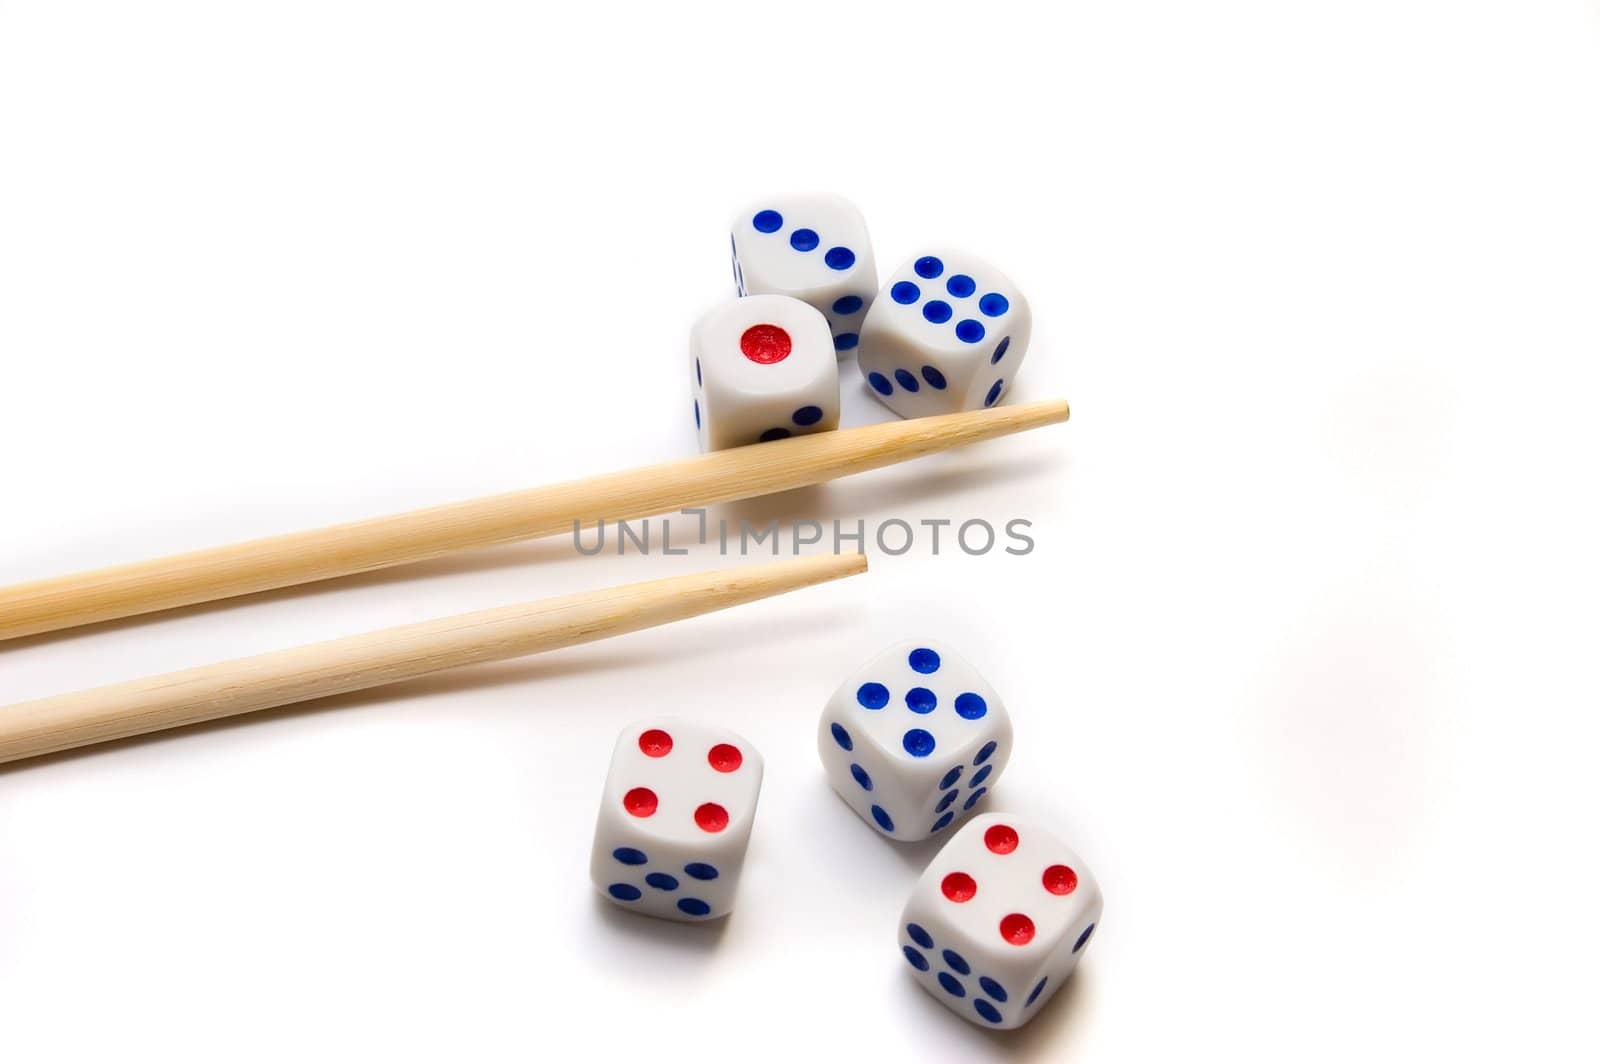 Chopsticks and dices by rusak